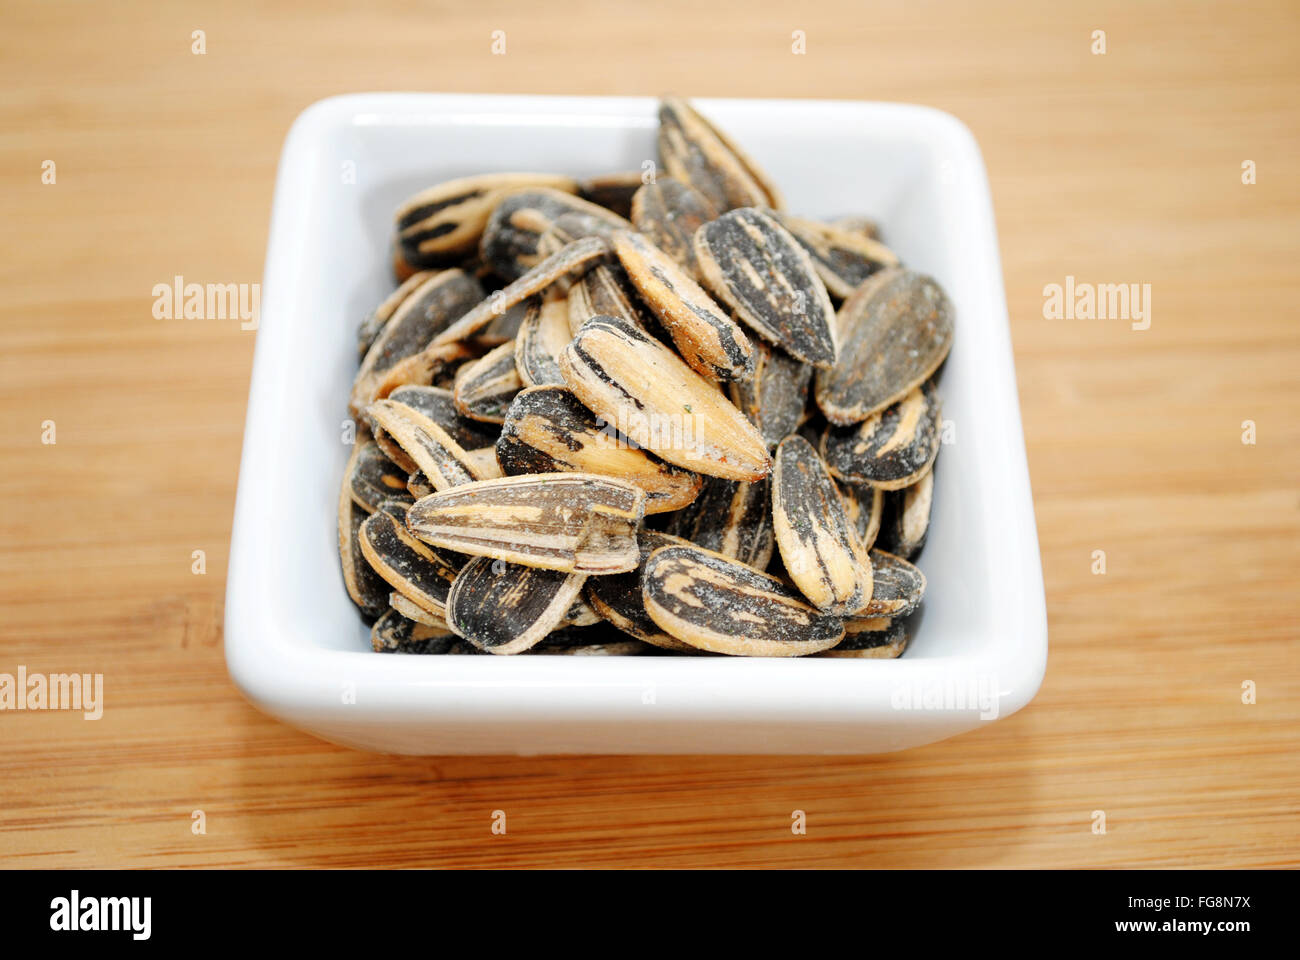 Ranch Flavored Sunflower Seeds in a White Square Bowl Stock Photo